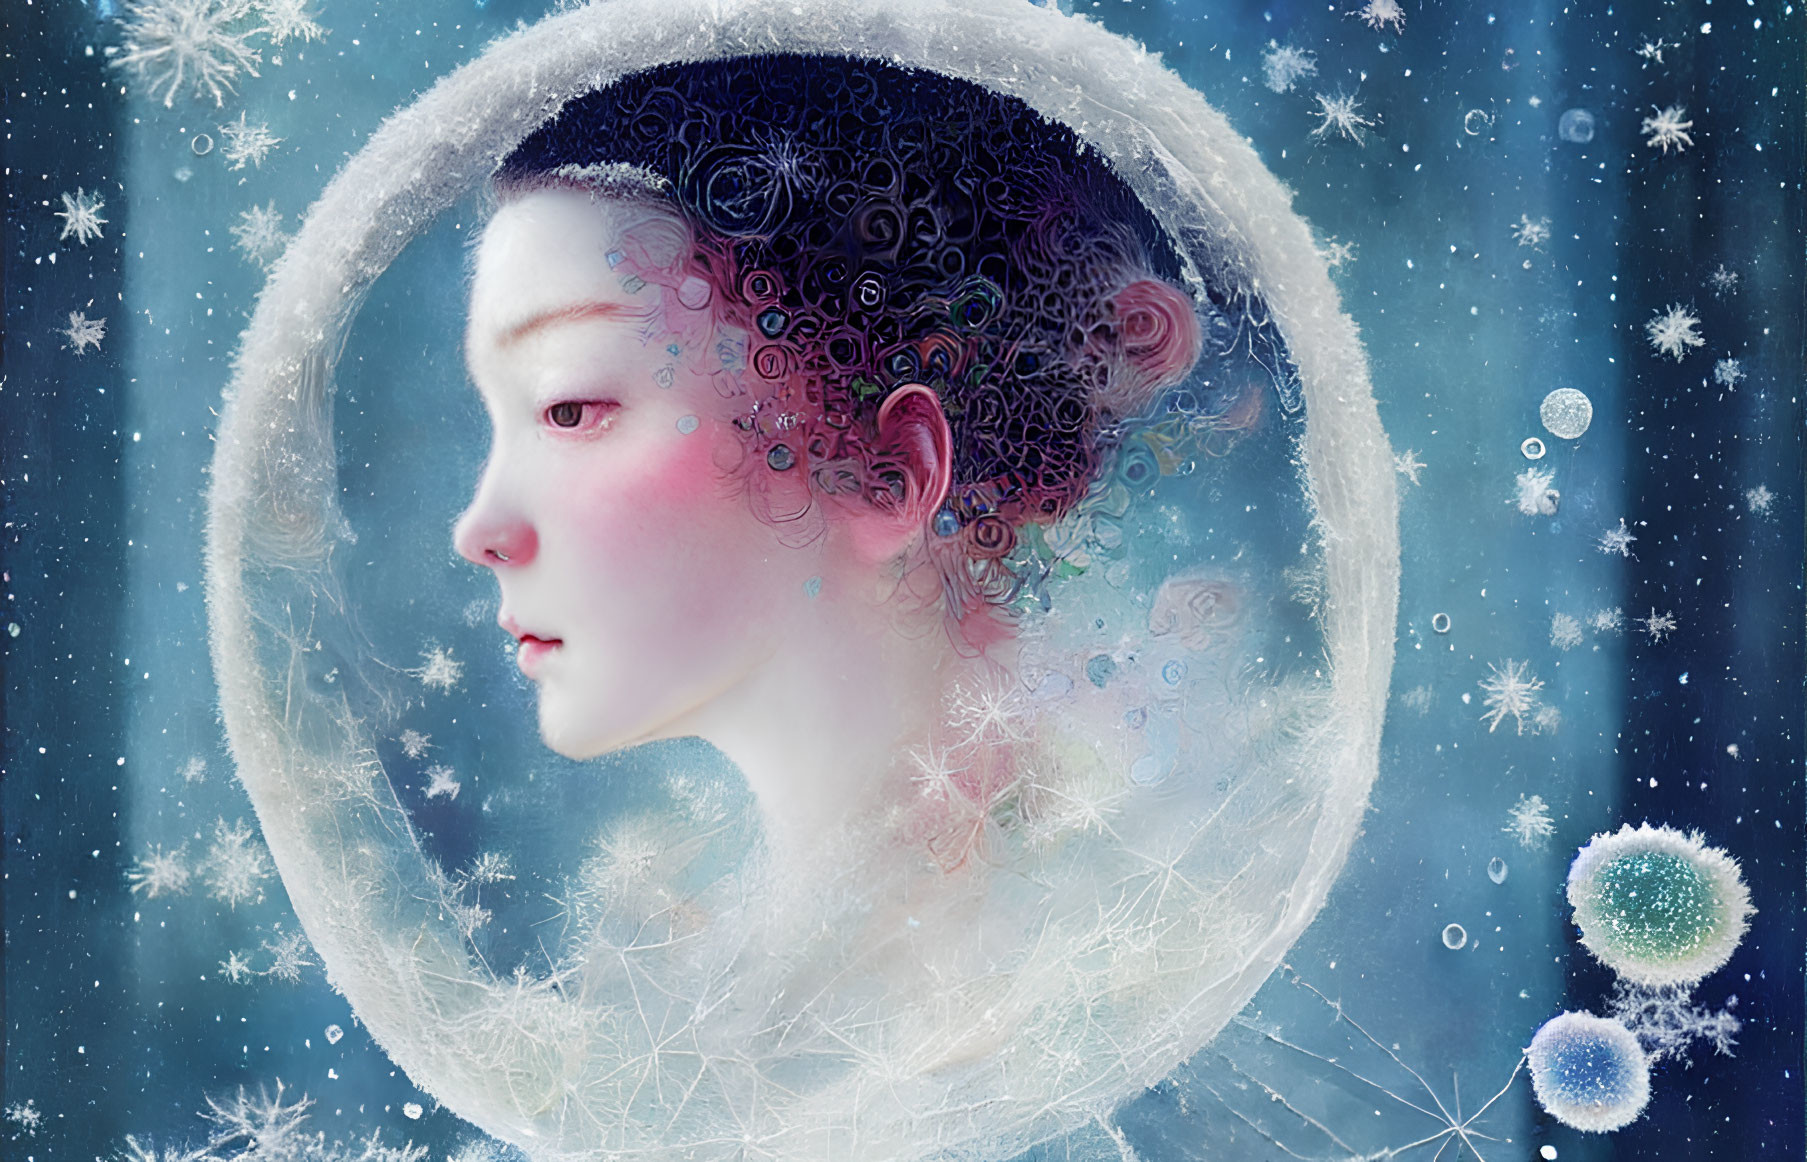 Digital artwork of wistful woman with glowing halo, snowflakes, and icy orbs on blue